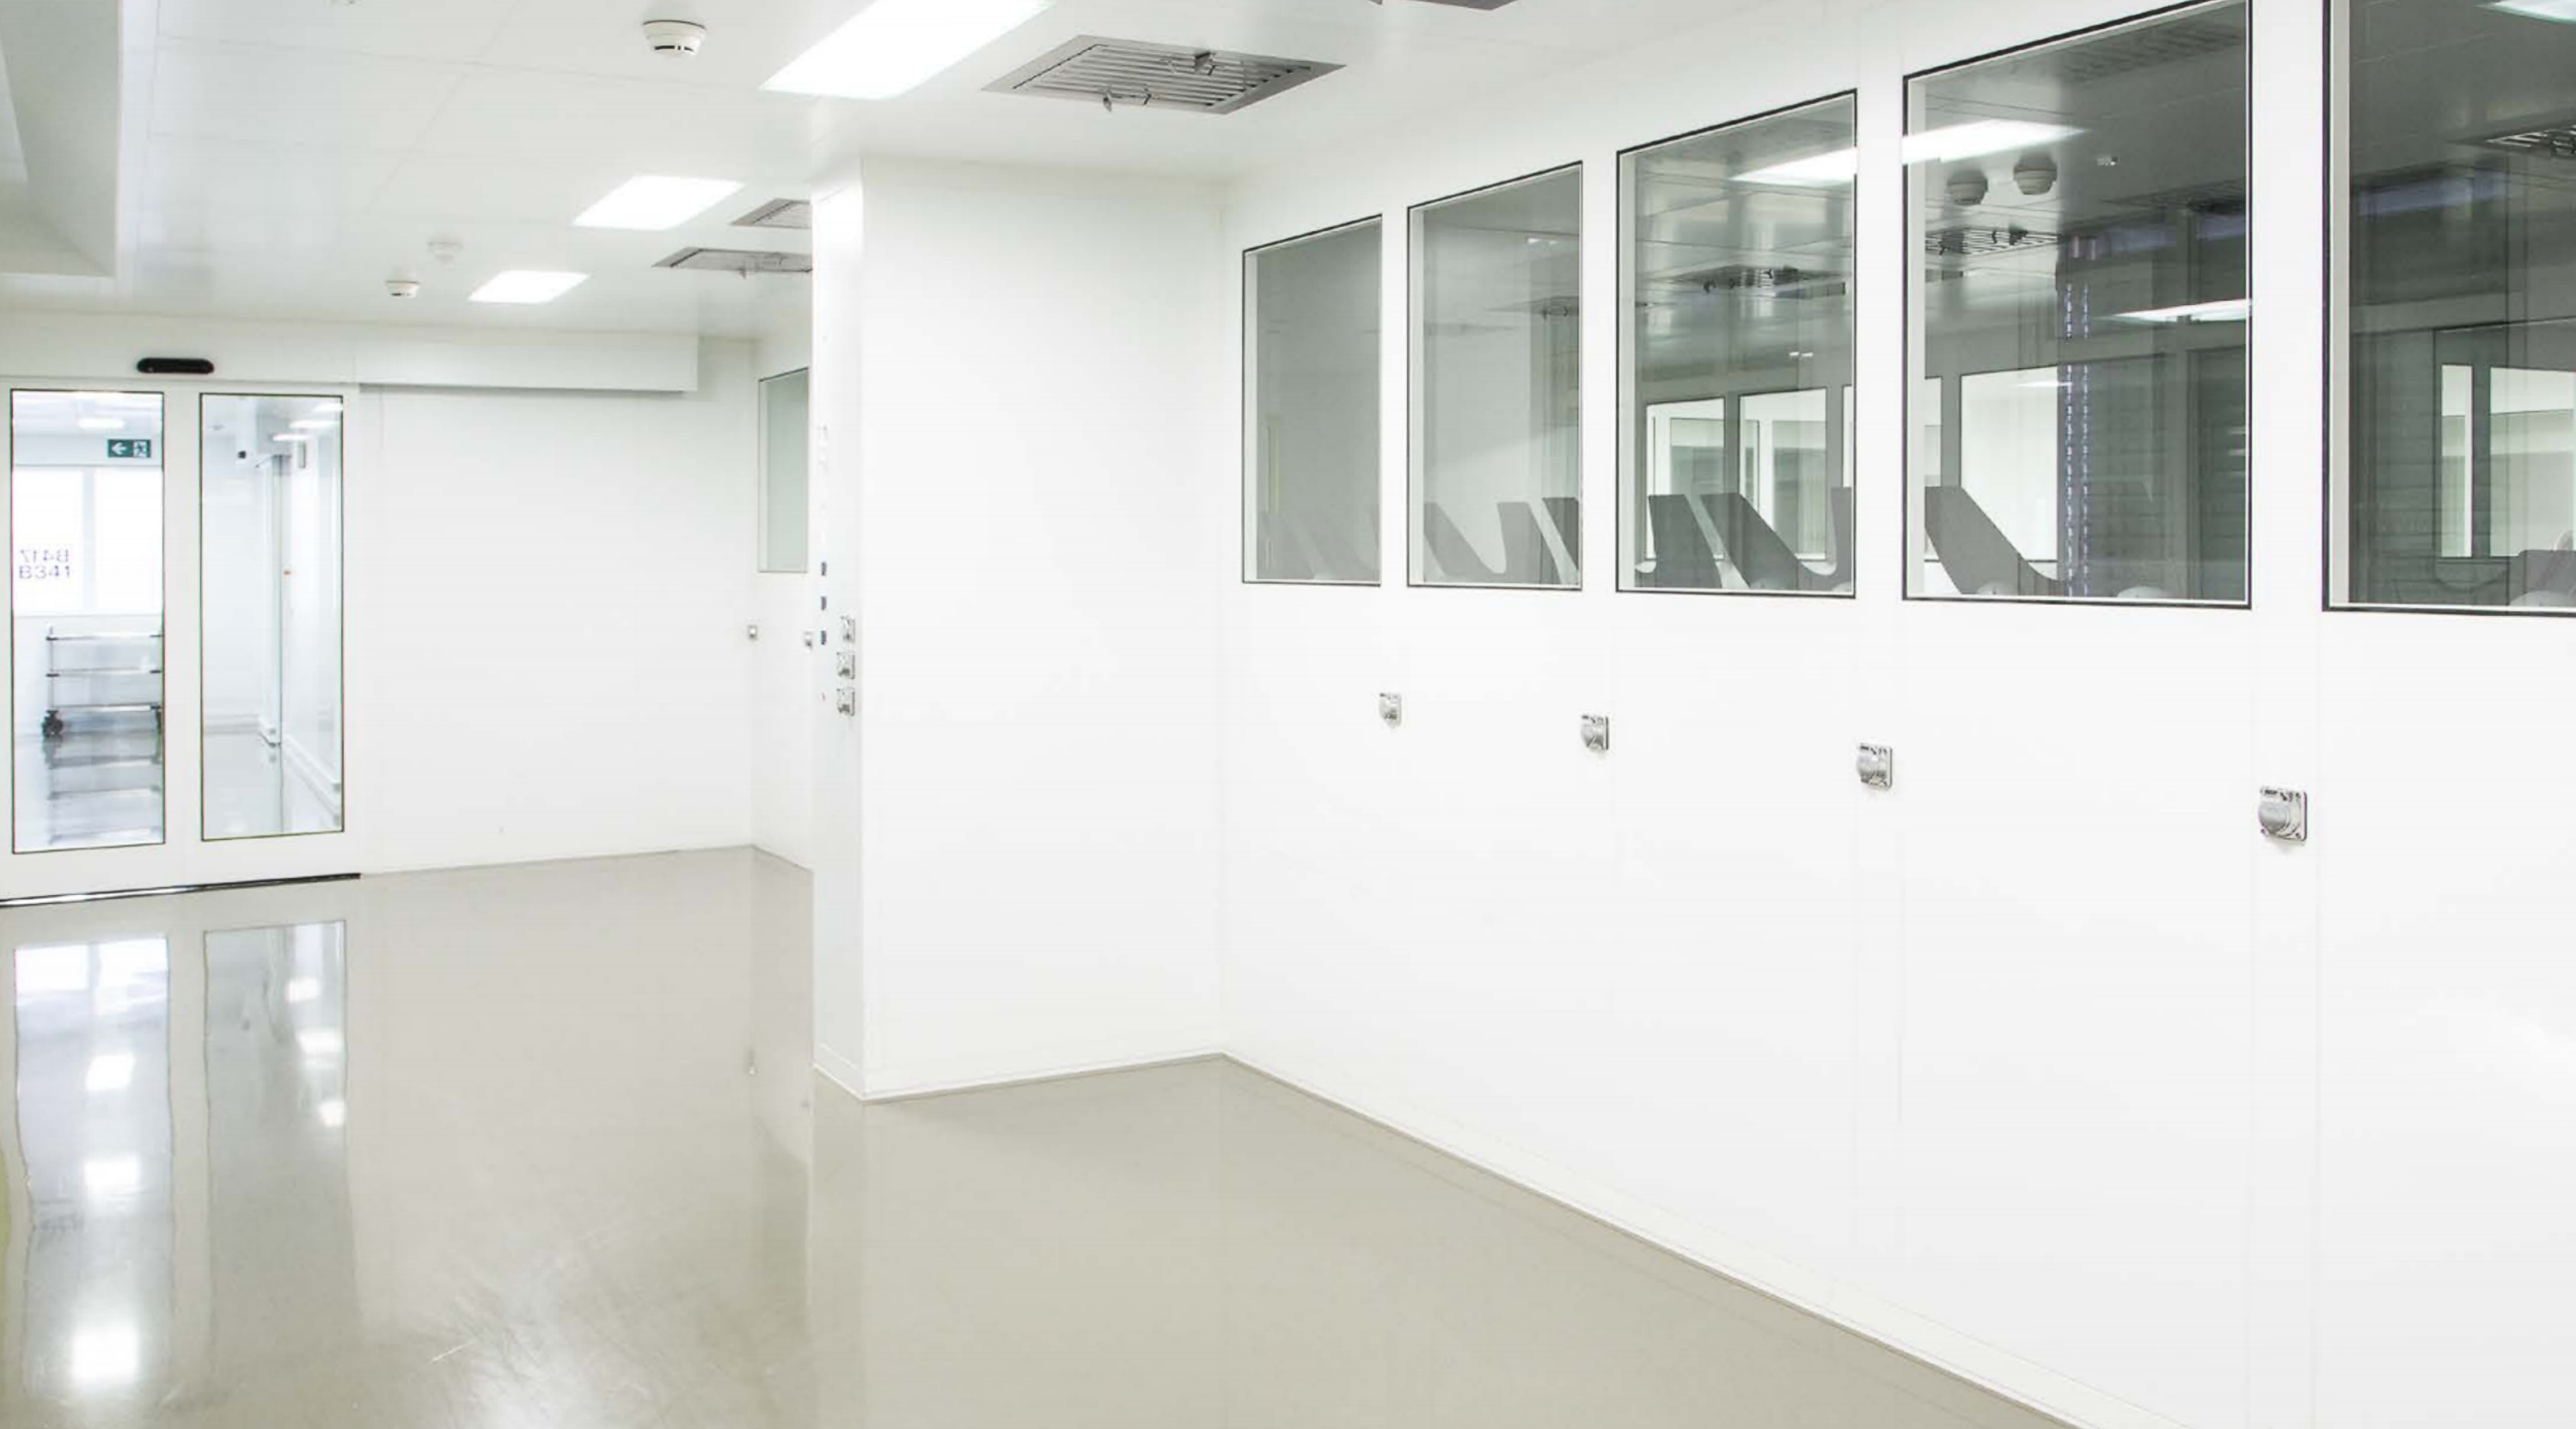 Clean rooms are used in sensitive areas such as medical environment, biotechnology or pharmaceutical manufacturing. They can also be found in semiconductor manufacturing.